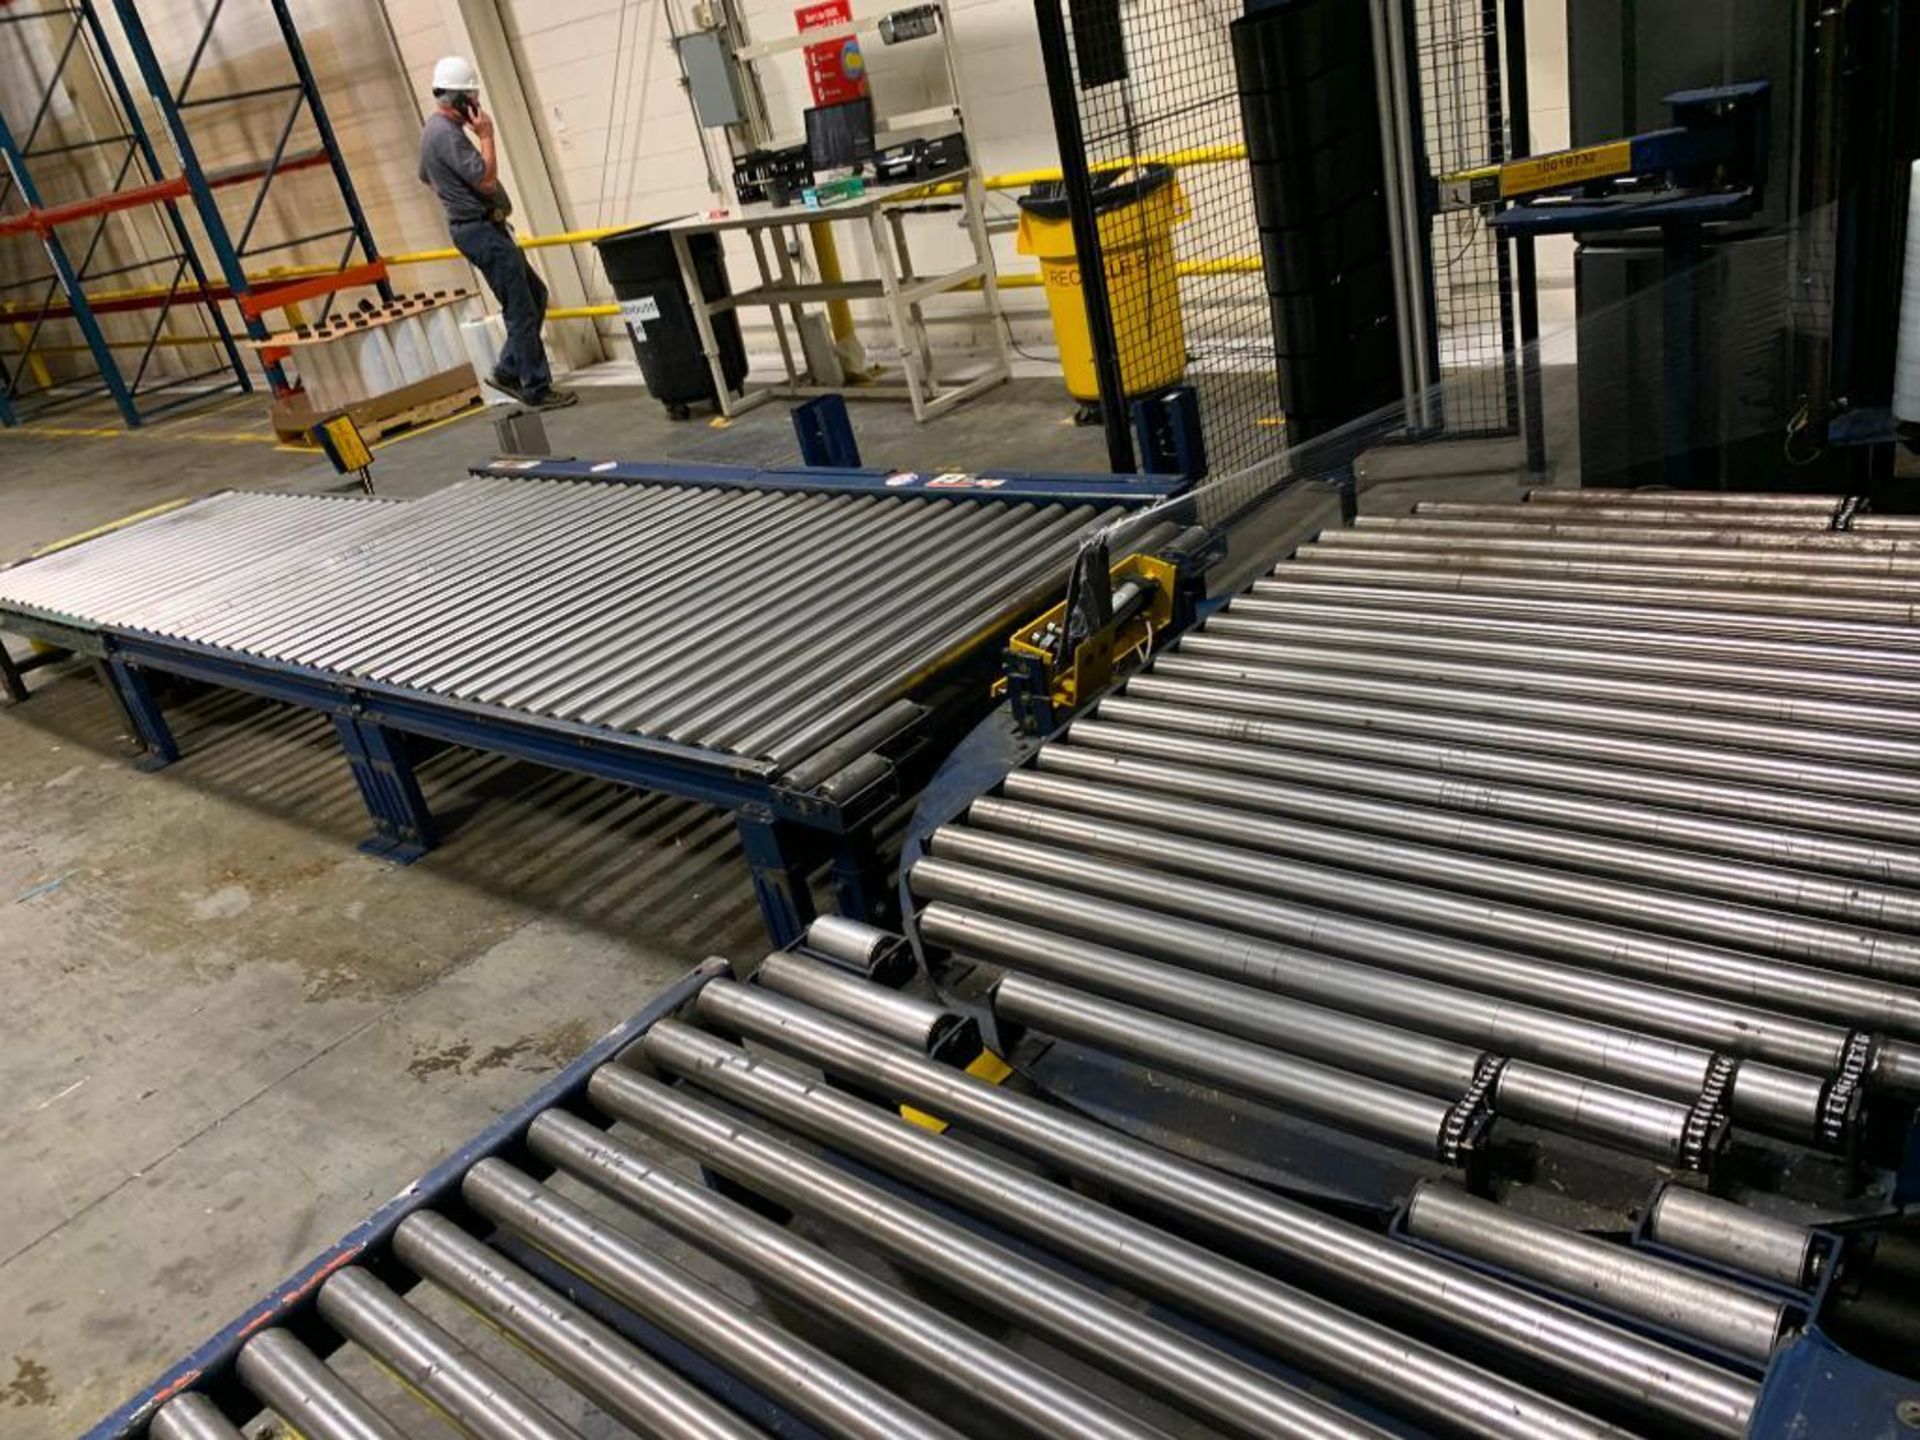 (6) skids of Lantech full pallet conveyor including turntable section - Located in Tifton, GA